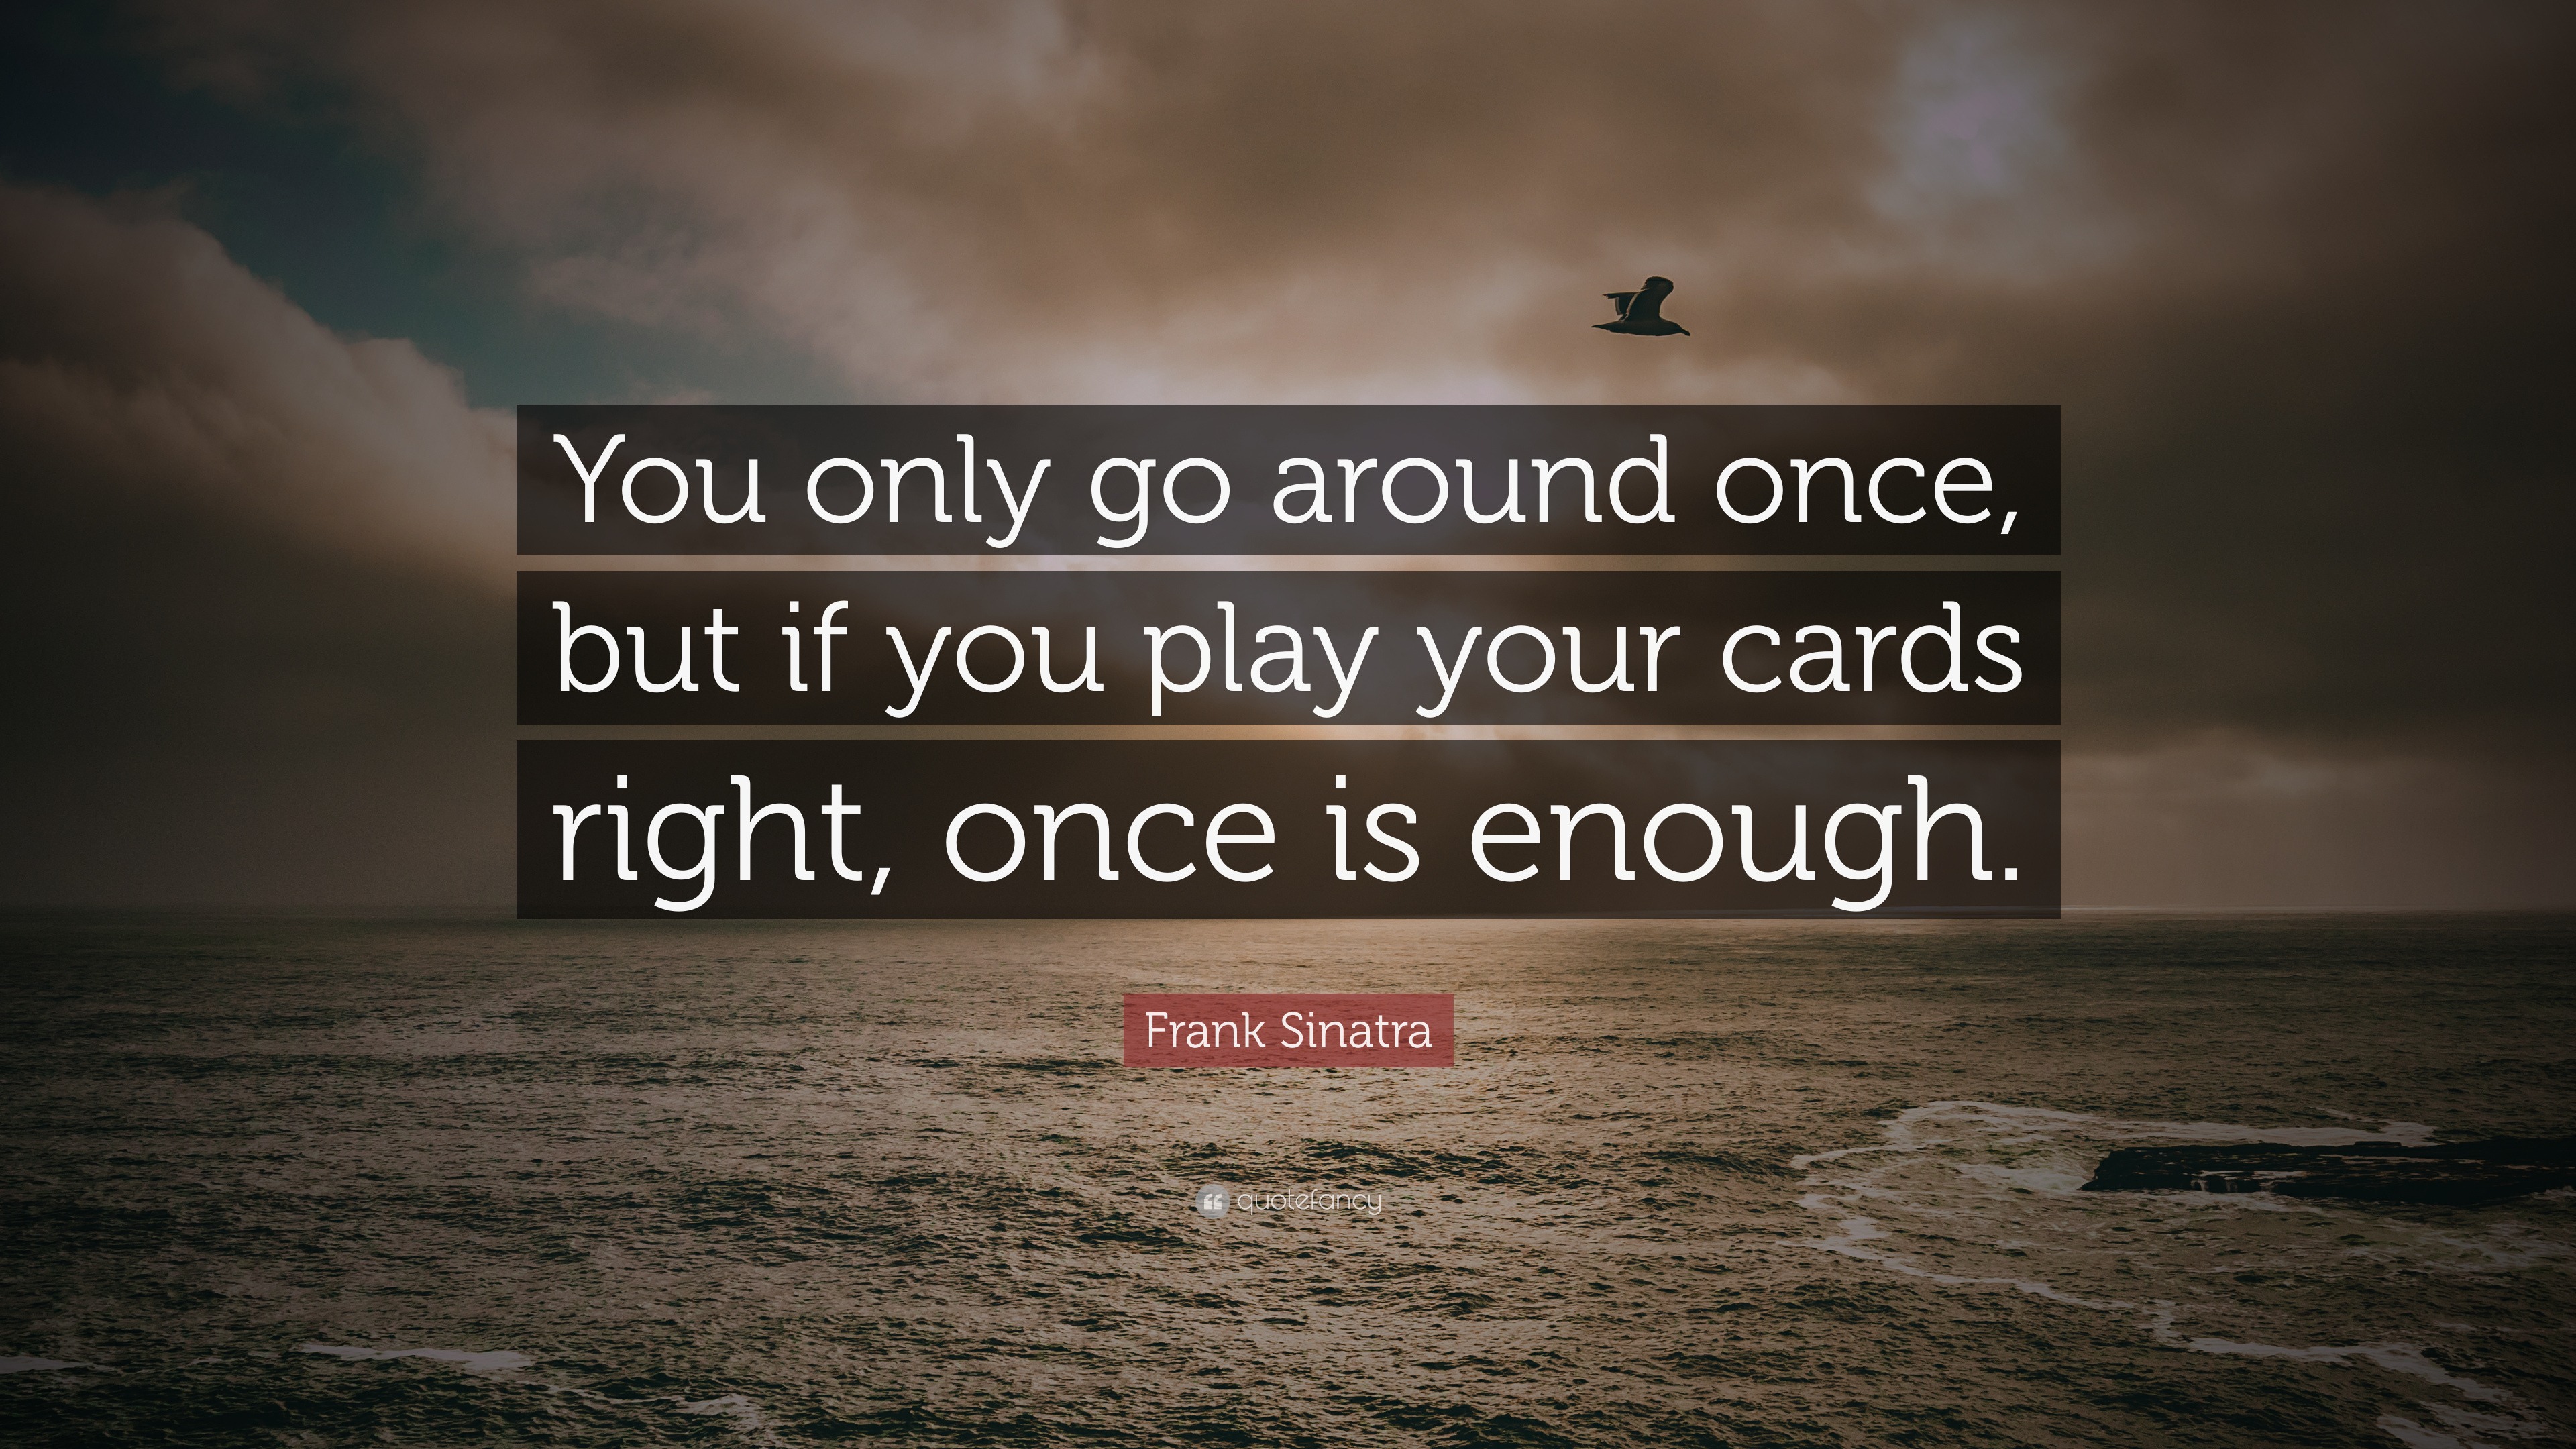 Frank Sinatra Quote “you Only Go Around Once But If You